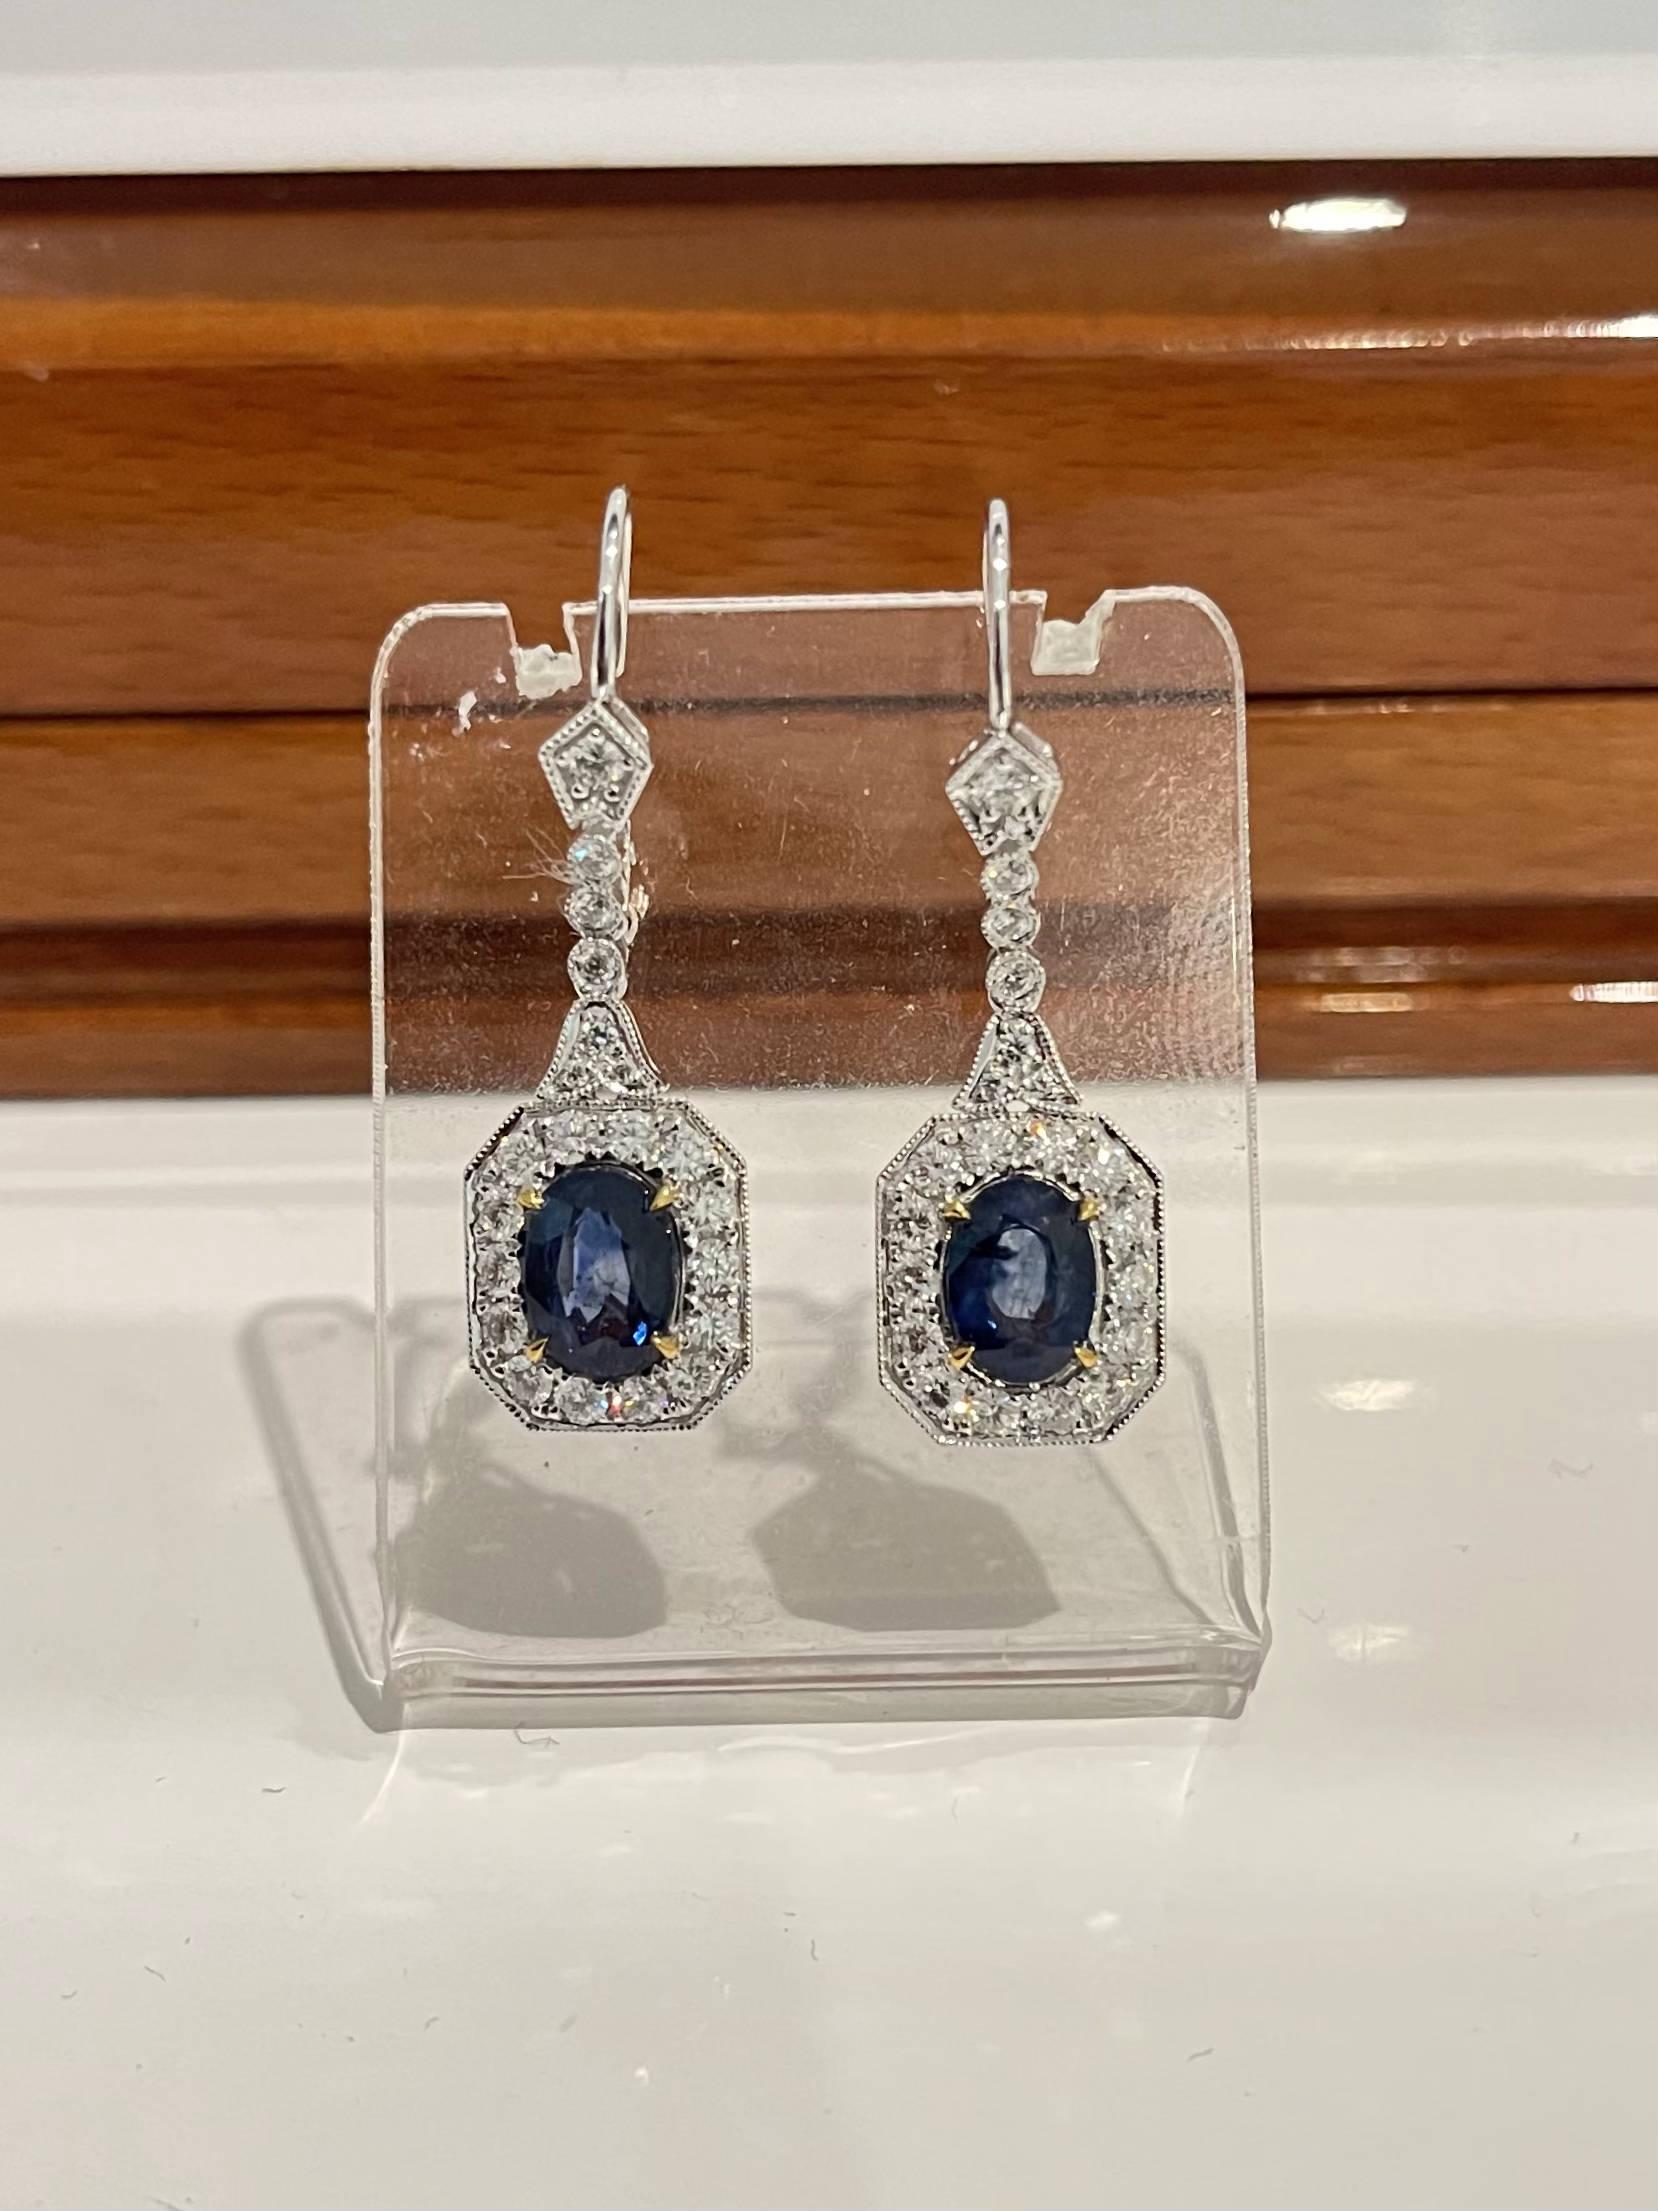 Oval shaped Sapphires, crafted with fourteen karat white gold, featuring a stunning selection of forty-two claw and rub over set round brilliant cut diamonds, complemented by a polished finish design. 

Sapphire Weight: 2.75ct
Sapphire Colour: